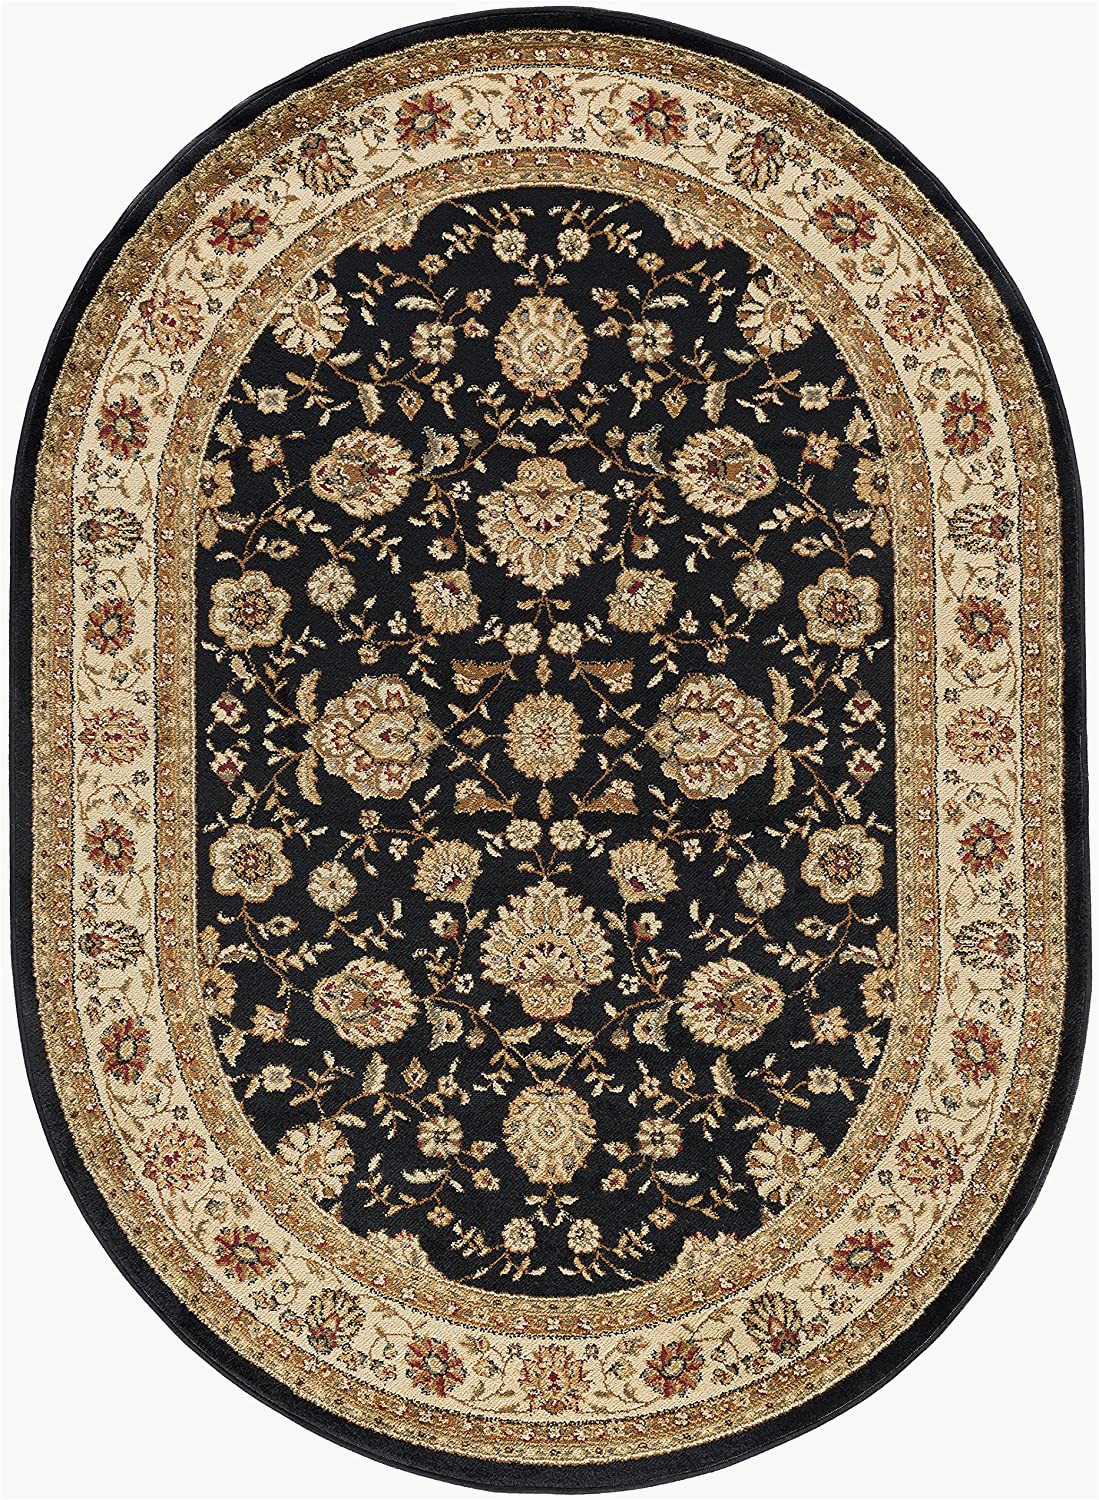 Cheap 7 X 10 area Rugs Raleigh Traditional Floral Black Oval area Rug 7 X 10 Oval